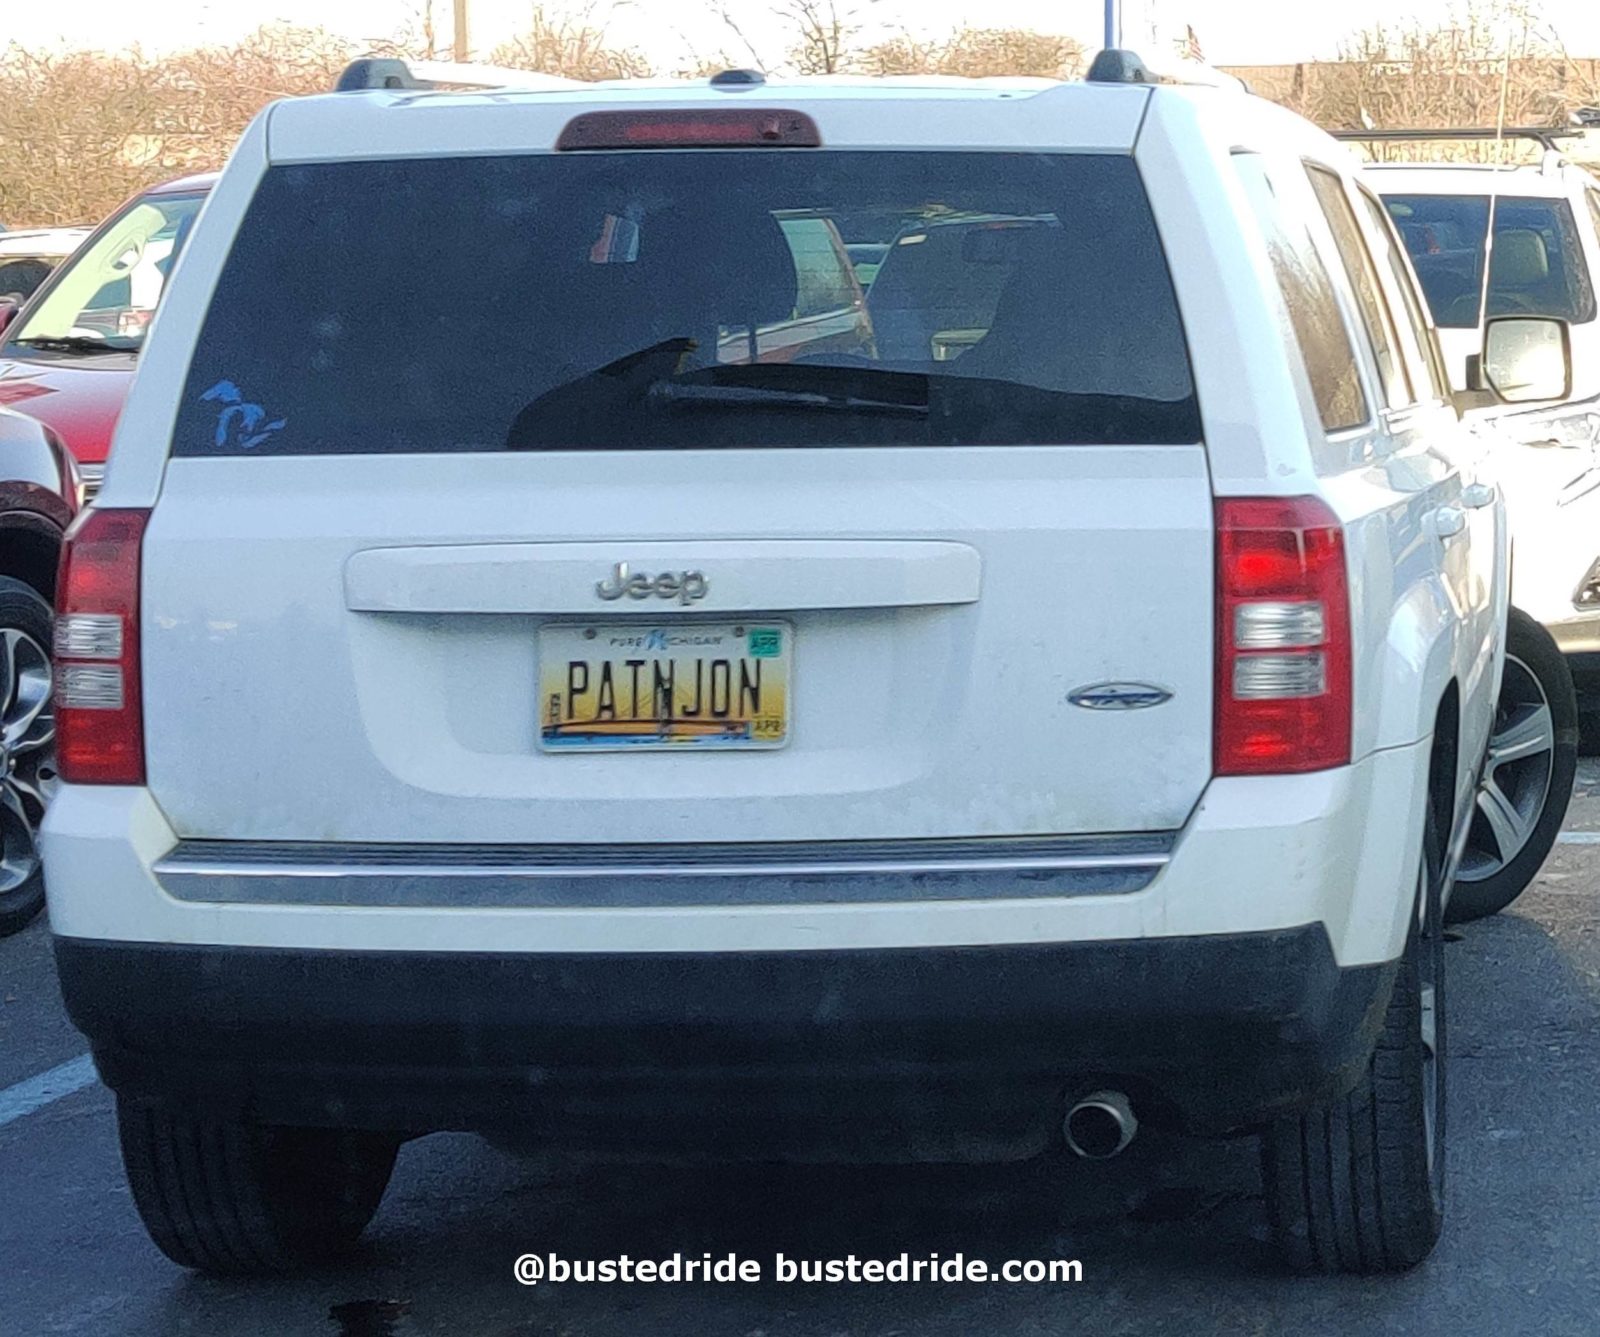 PATNJON - Vanity License Plate by Busted Ride